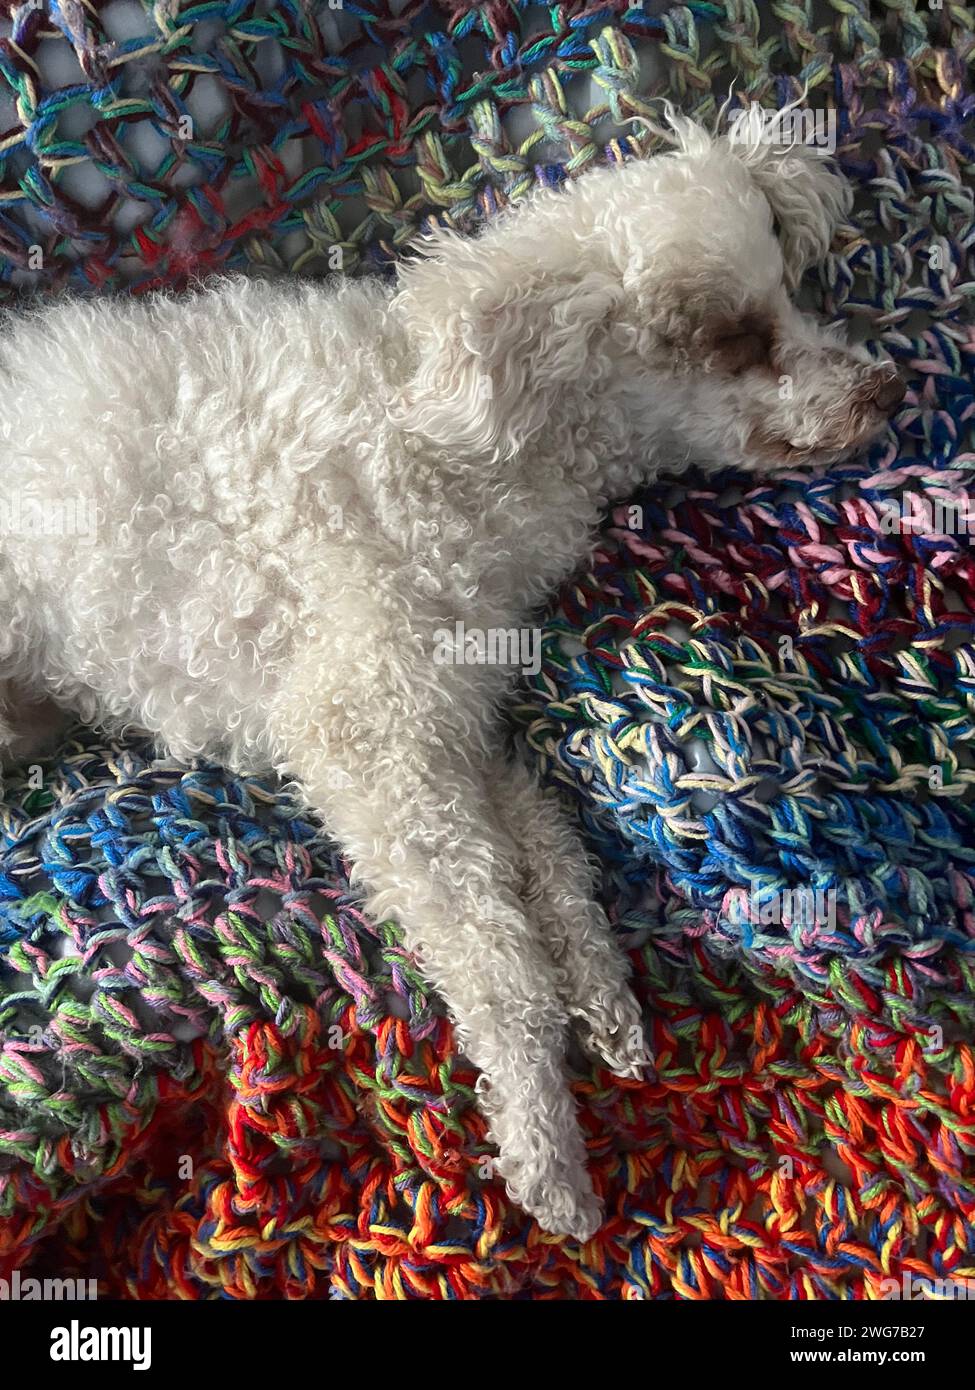 Relaxed dog sleeping peacefully on his masters bed quilt. Stock Photo